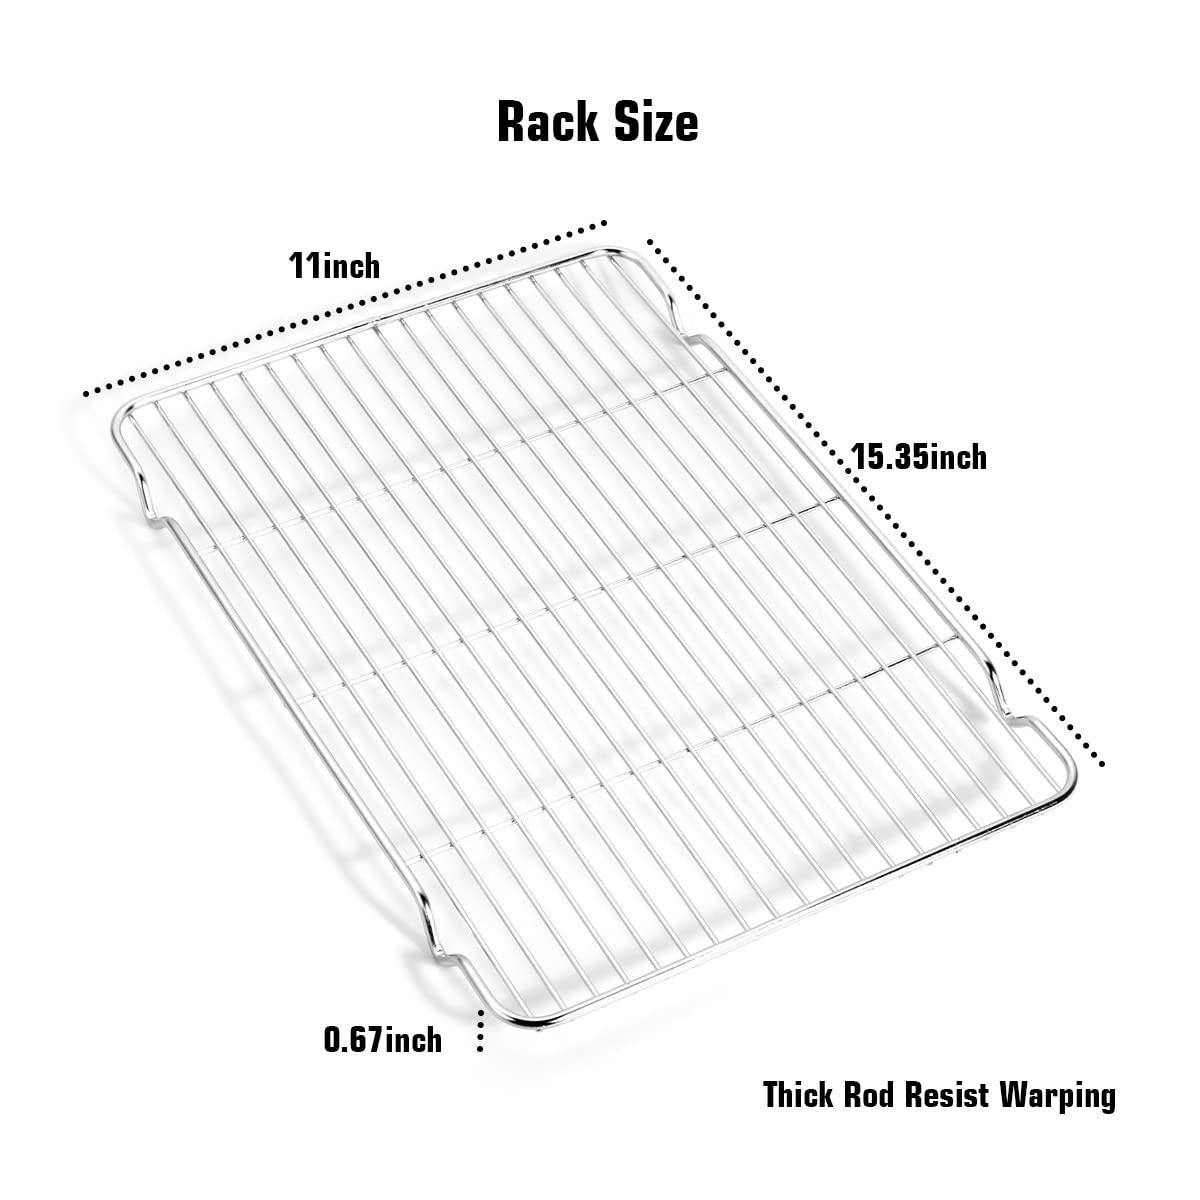 Wildone Baking Sheet & Rack Set [2 Sheets + 2 Racks], Stainless Steel Cookie Pan with Cooling Rack, Size 16 x 12 x 1 Inch, Non Toxic & Heavy Duty & Easy Clean - CookCave